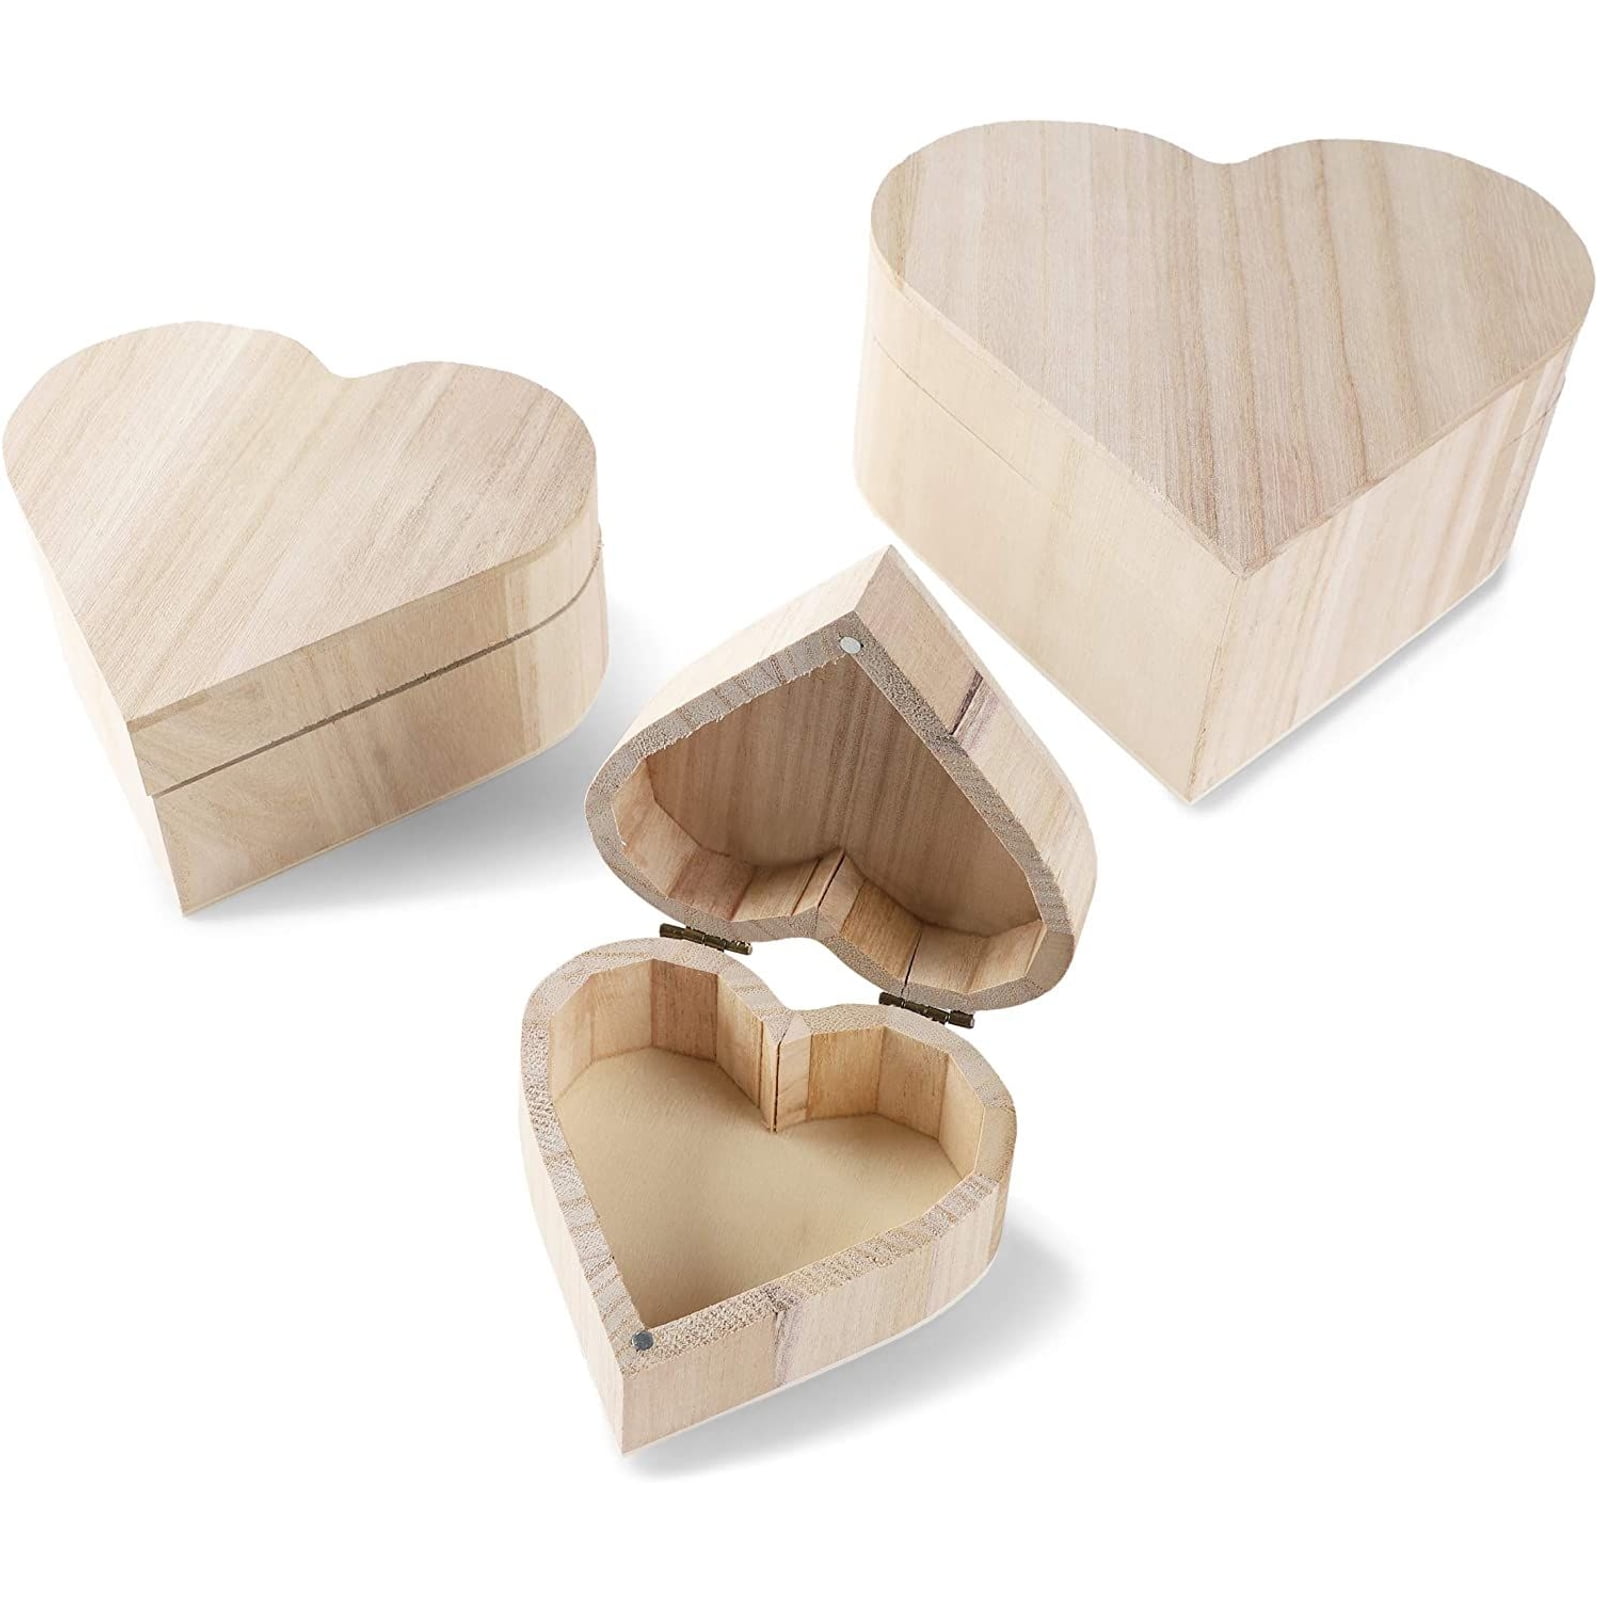 Handcrafted Wood Storage Box Heart Shaped Jewelry Box Container Organizer 